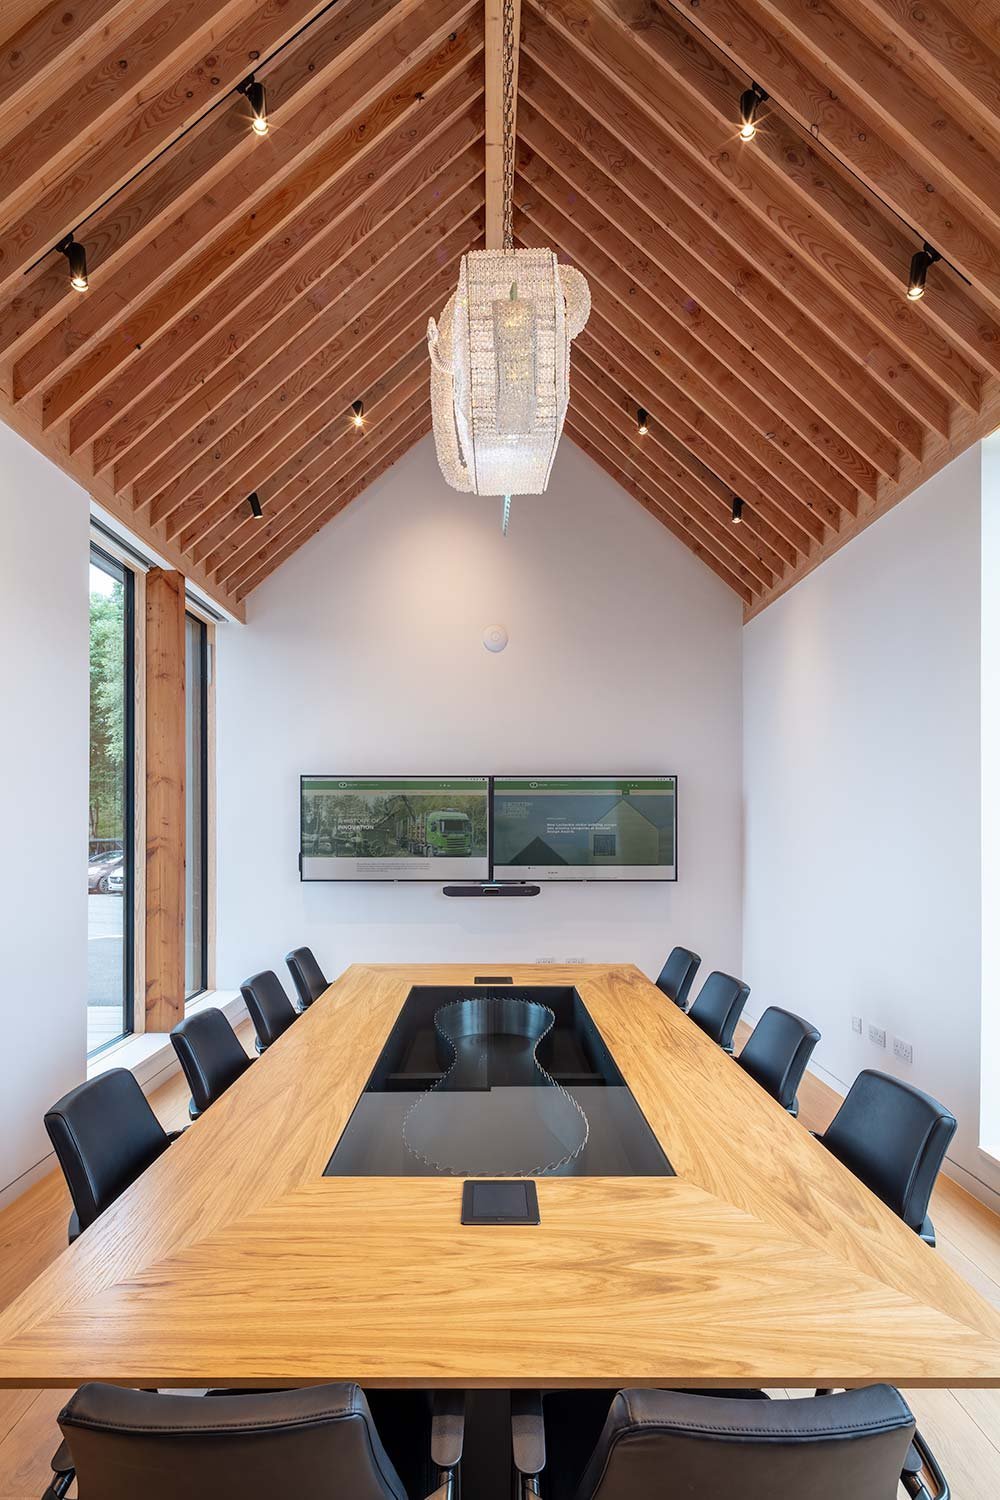 bespoke boardroomtable with axia chairs